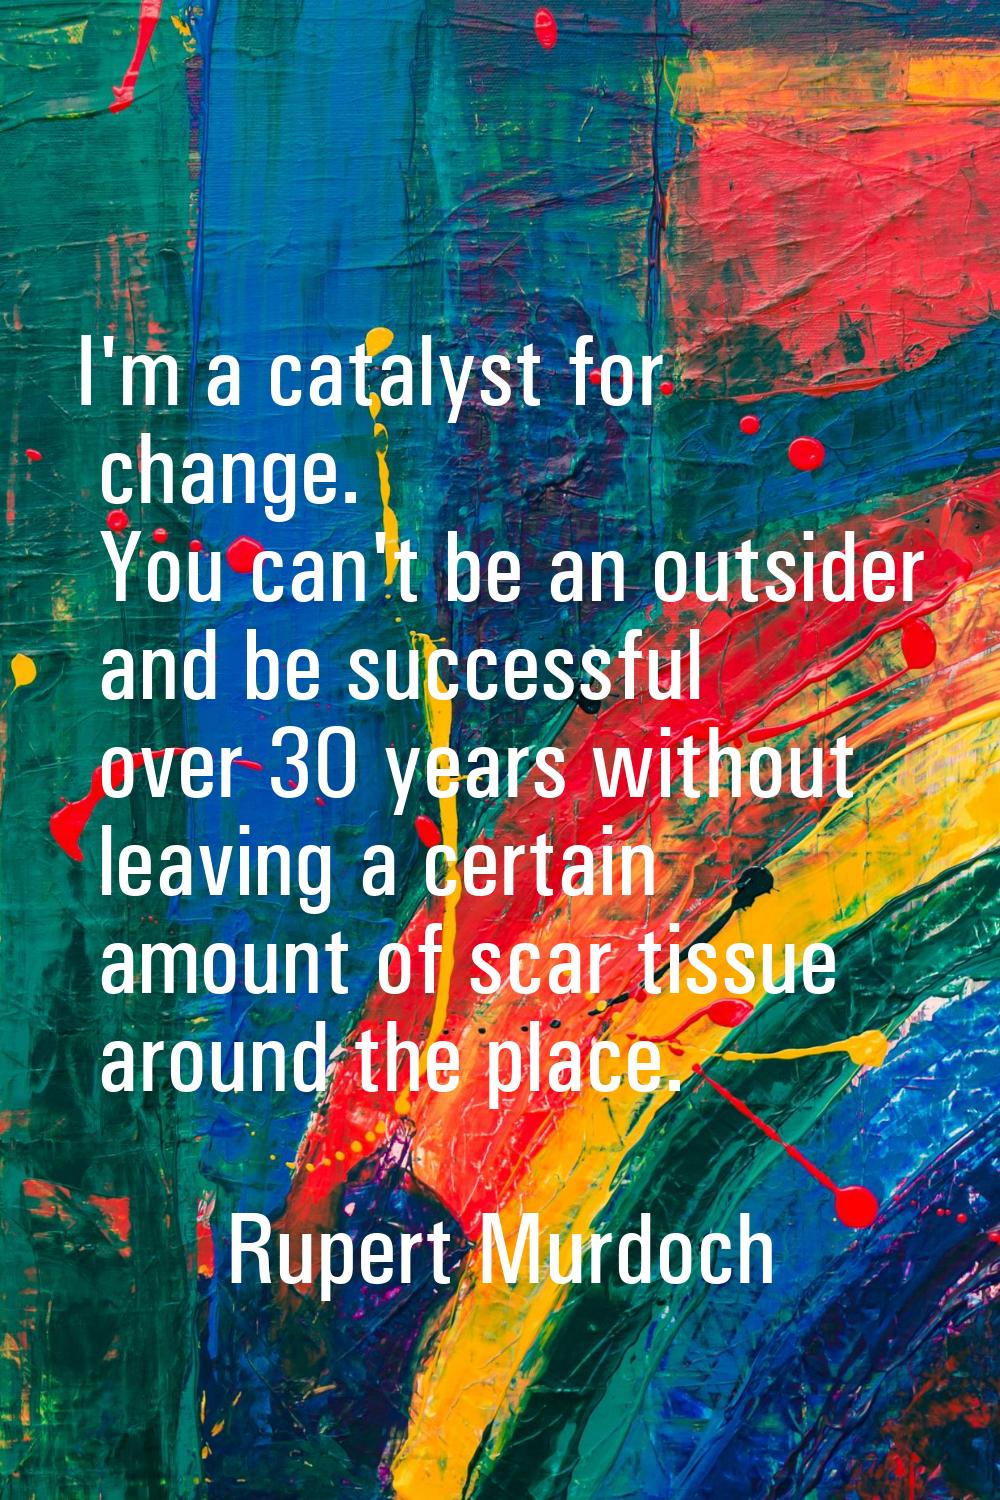 I'm a catalyst for change. You can't be an outsider and be successful over 30 years without leaving